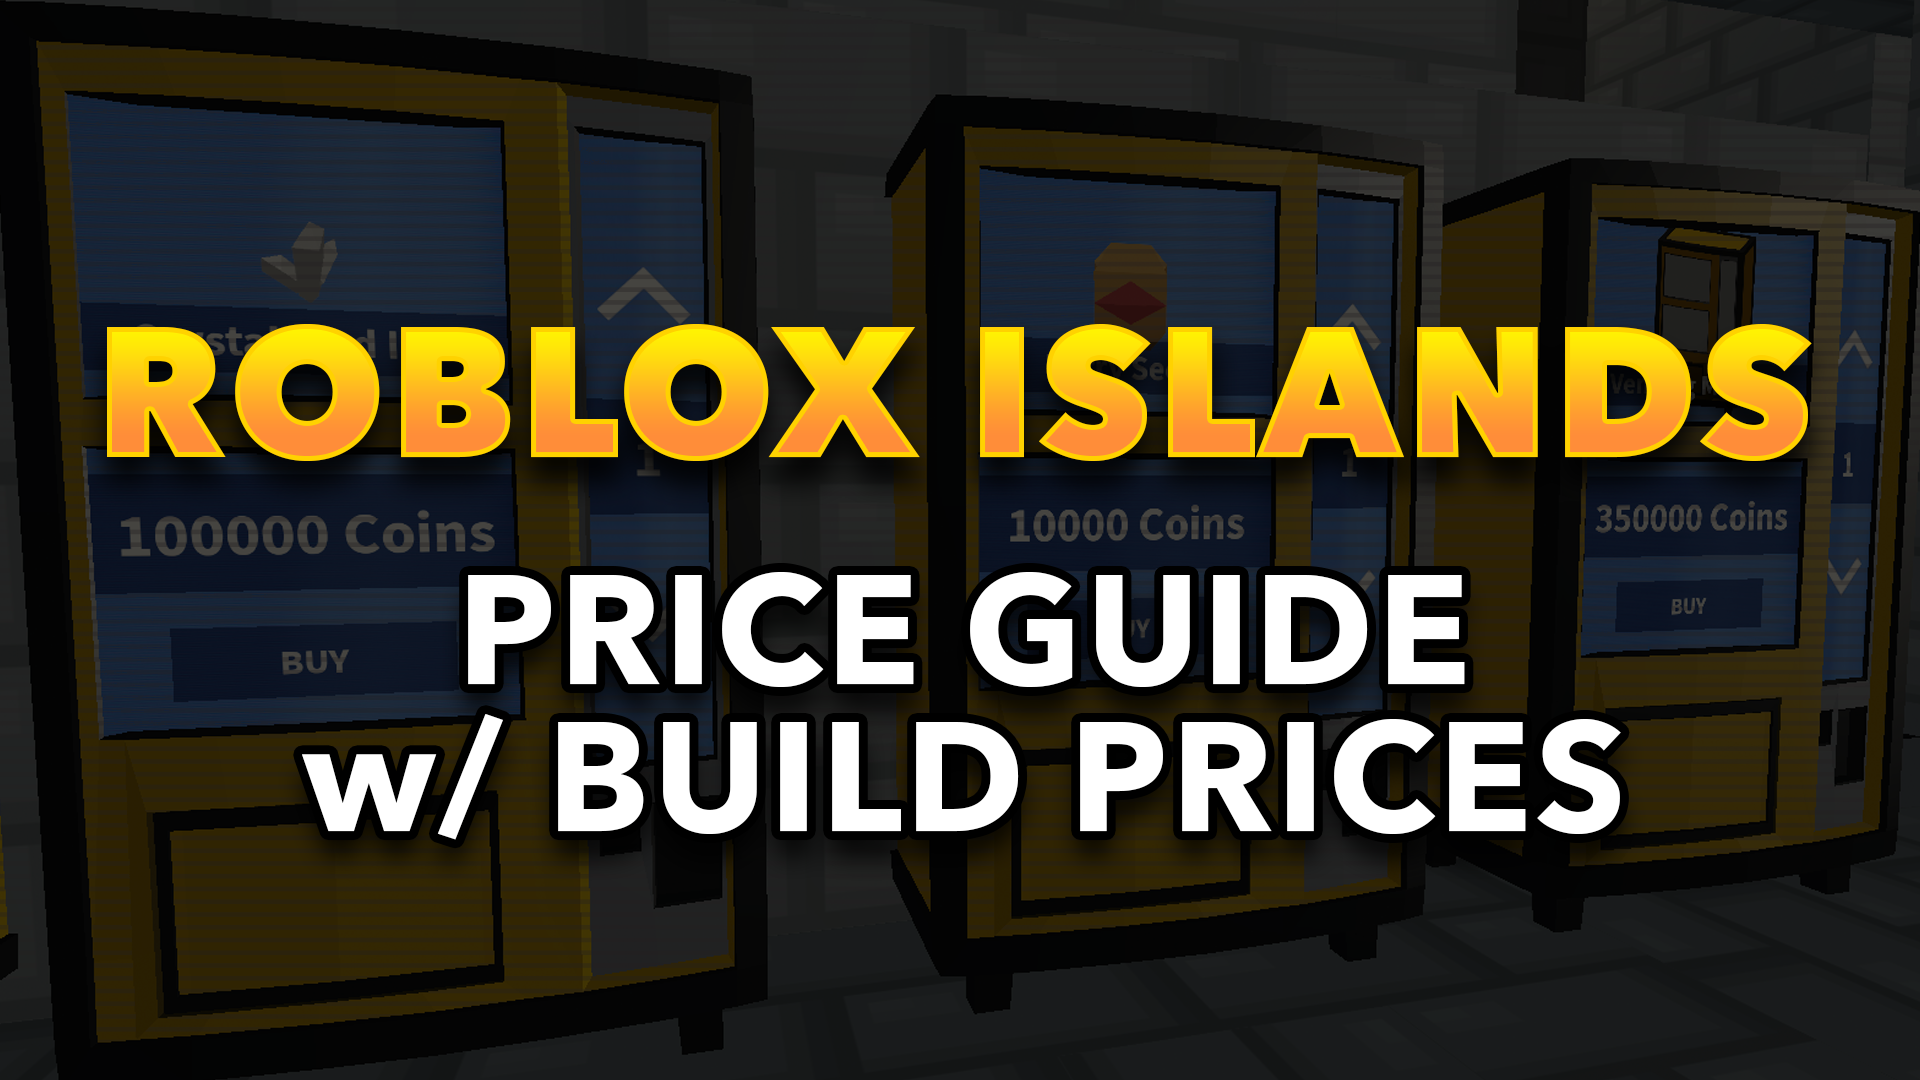 Complete Roblox Islands Price Guide - 700 robux price